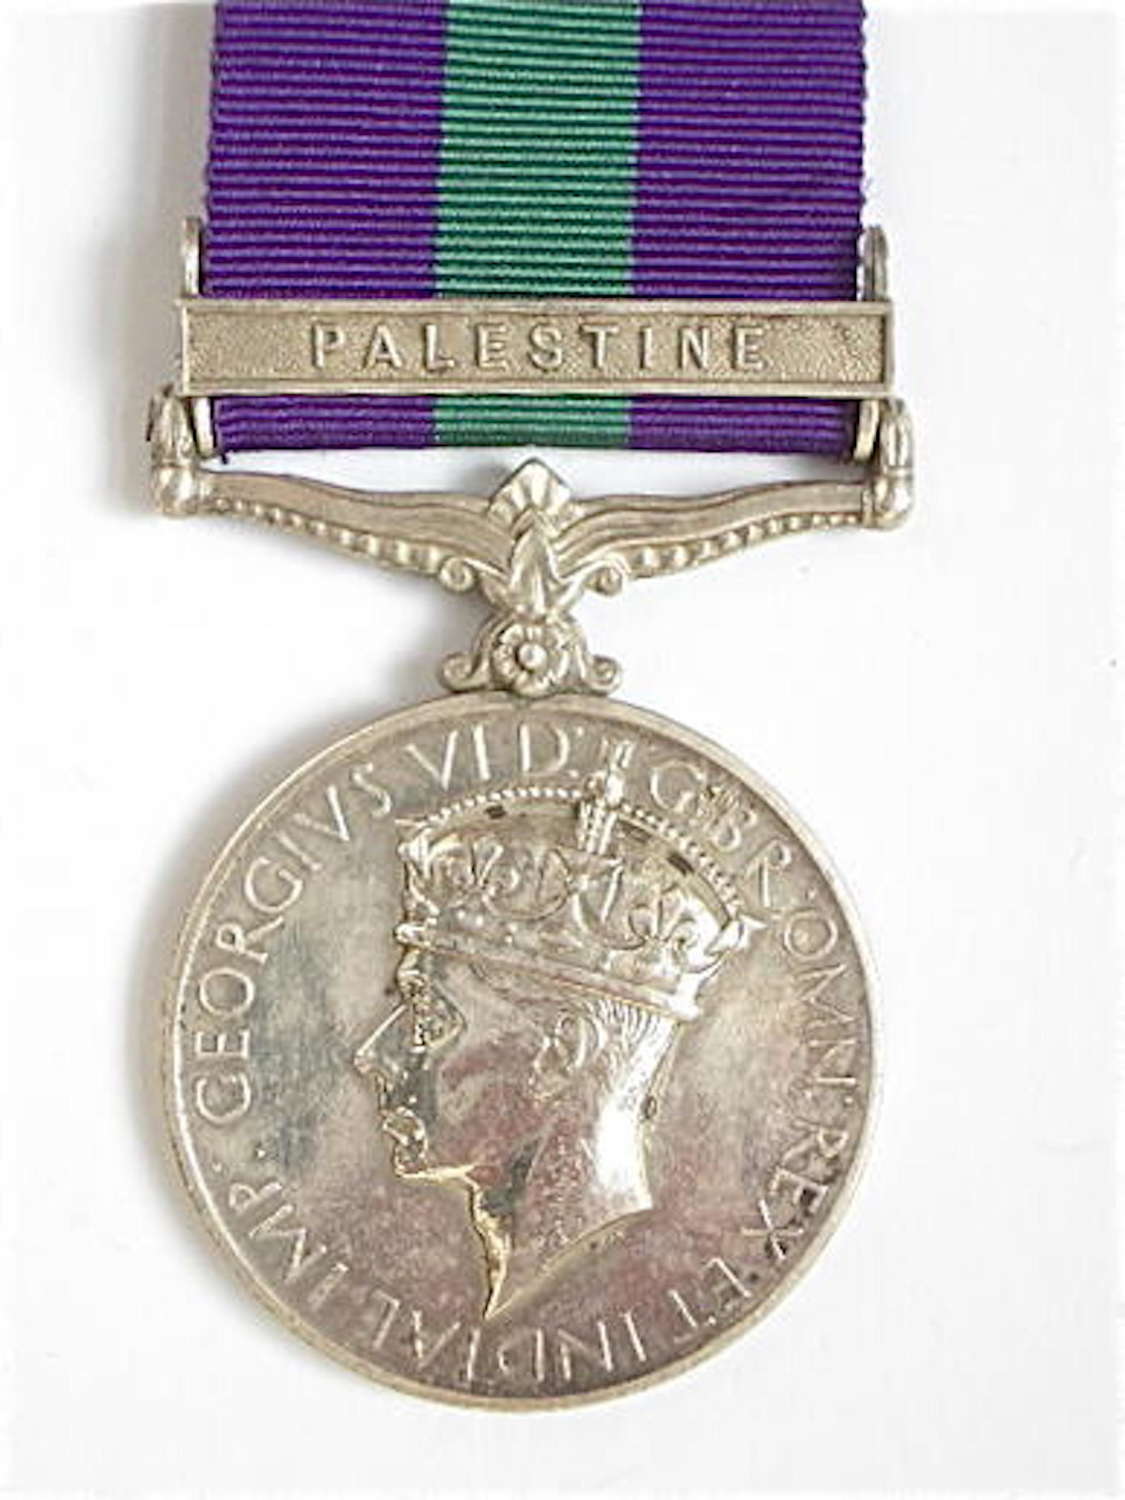 Royal Scots Fusiliers General Service Medal clasp “Palestine”